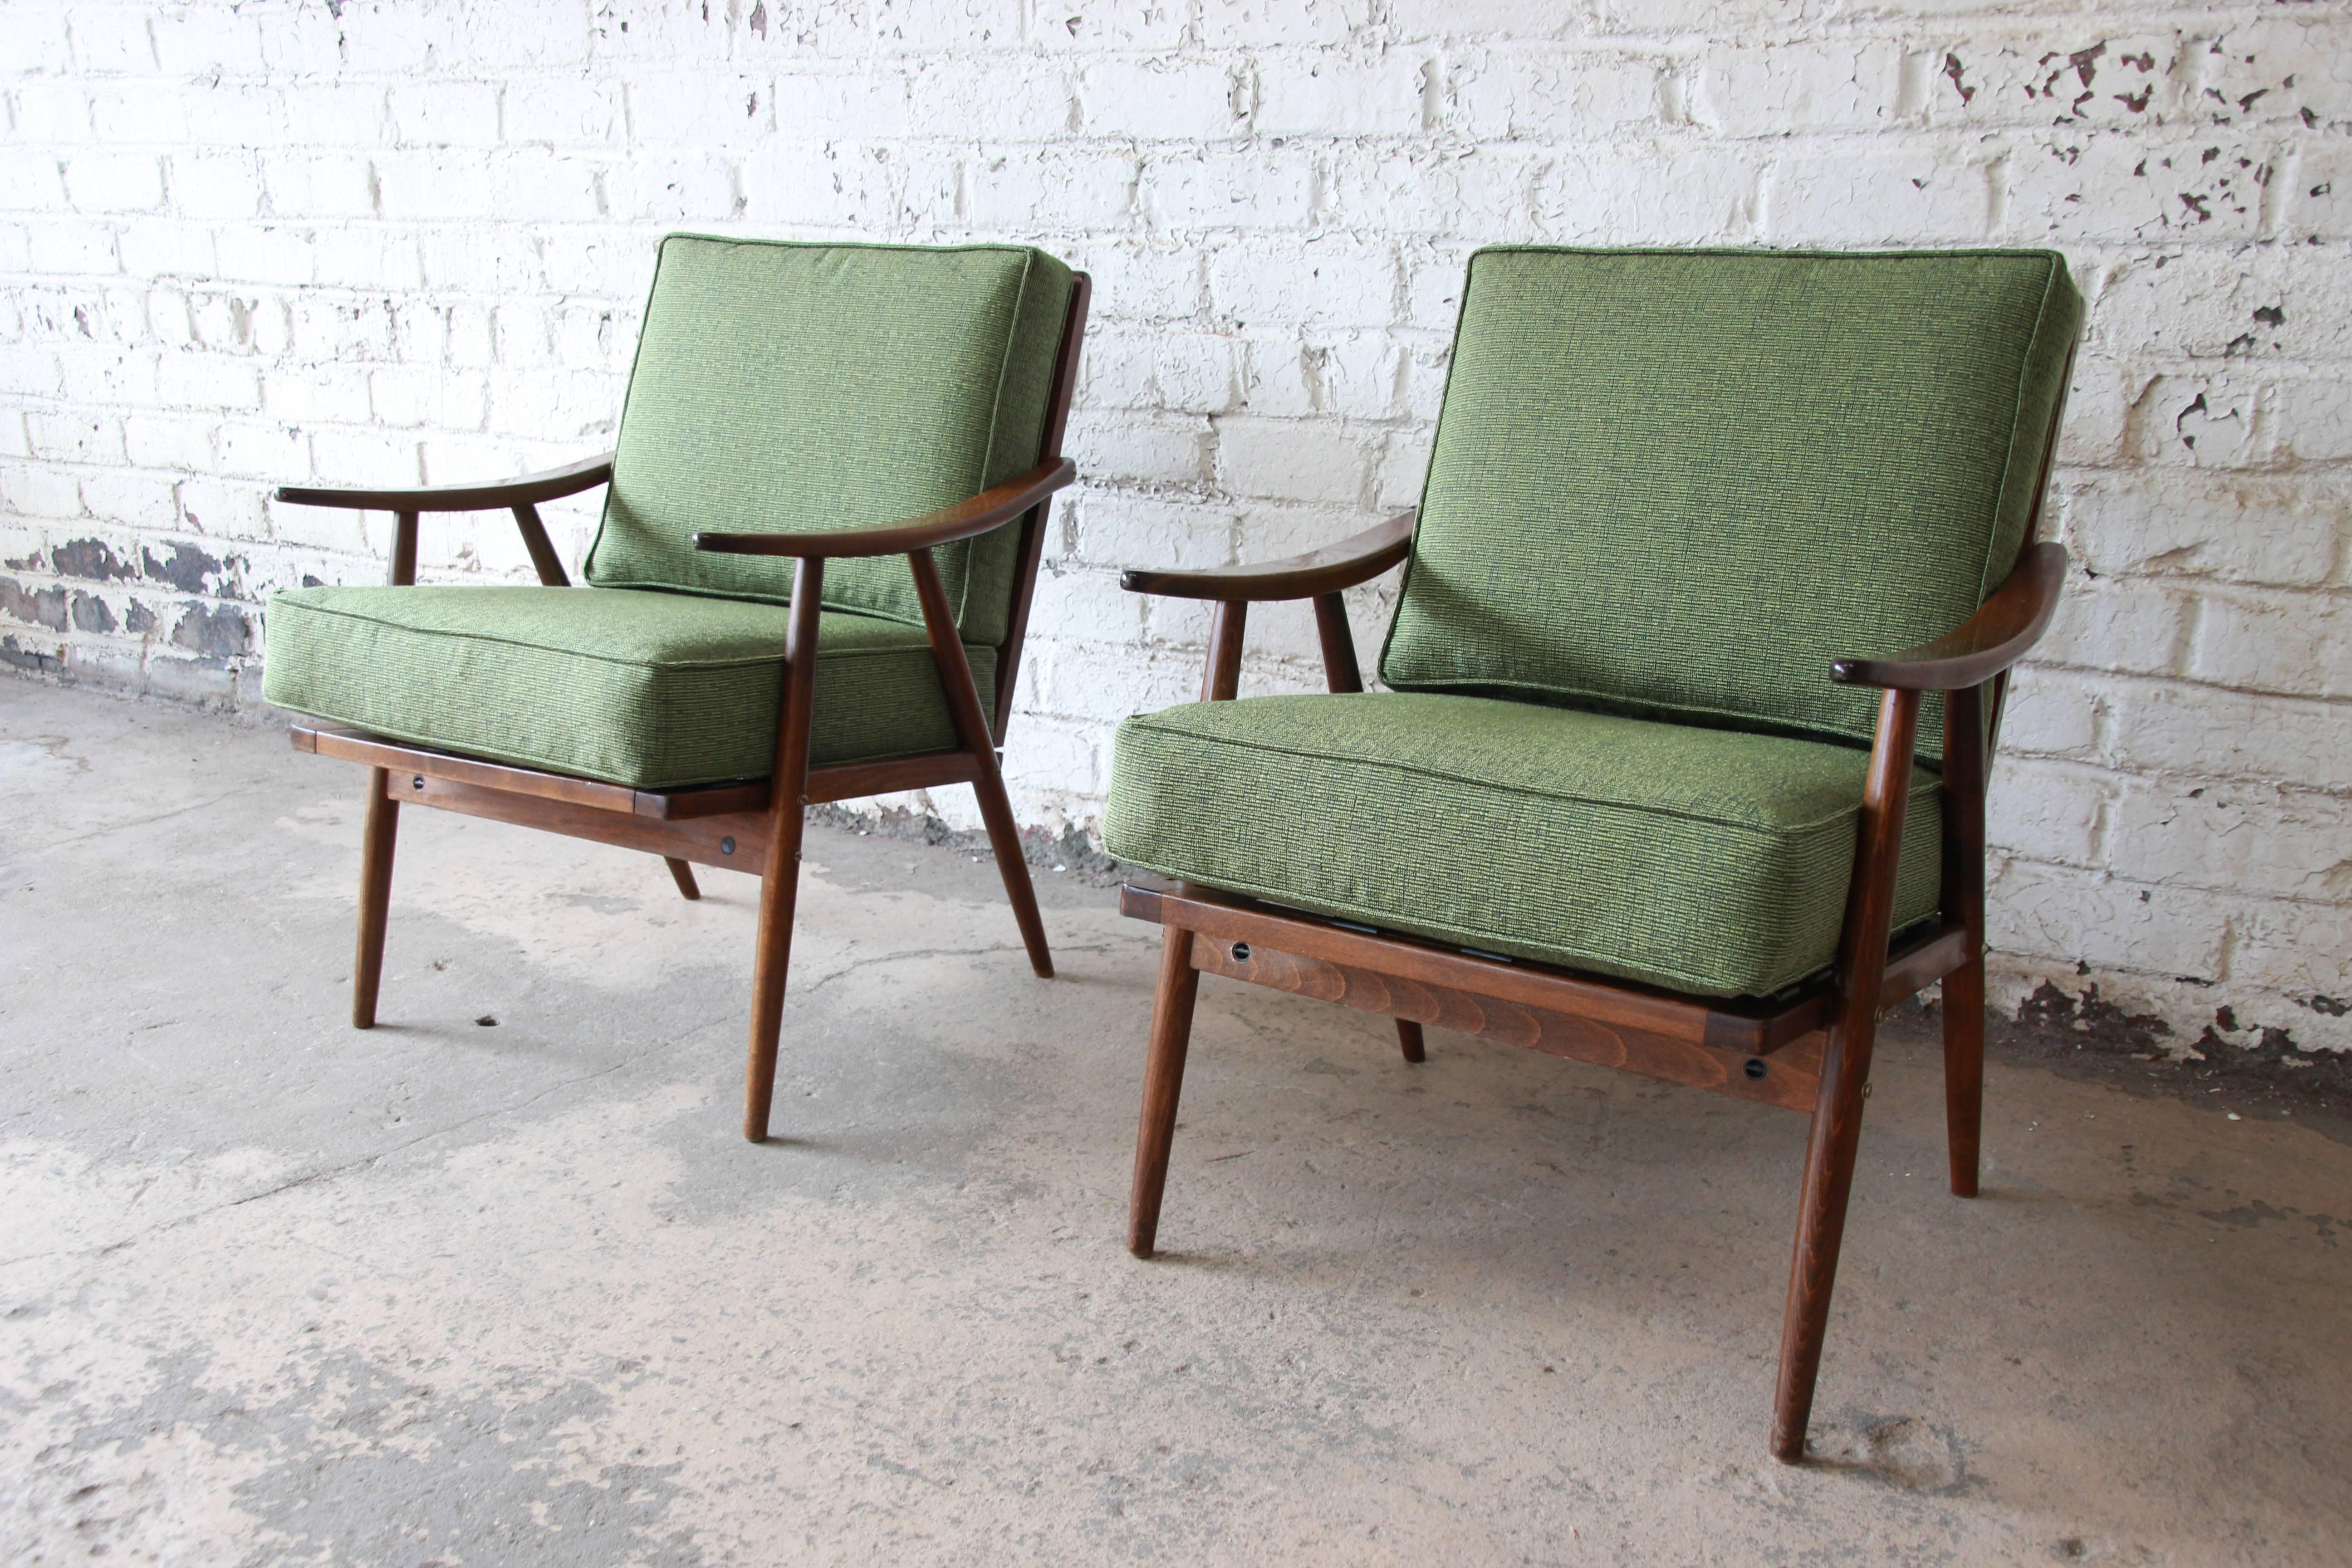 An exceptional pair of Mid-Century Modern lounge chairs in the Danish Modern style. The chairs were manufactured, circa 1950 by Ligna. They feature gorgeous sculpted solid walnut frames, with sleek and stylish Mid-Century design. Recently